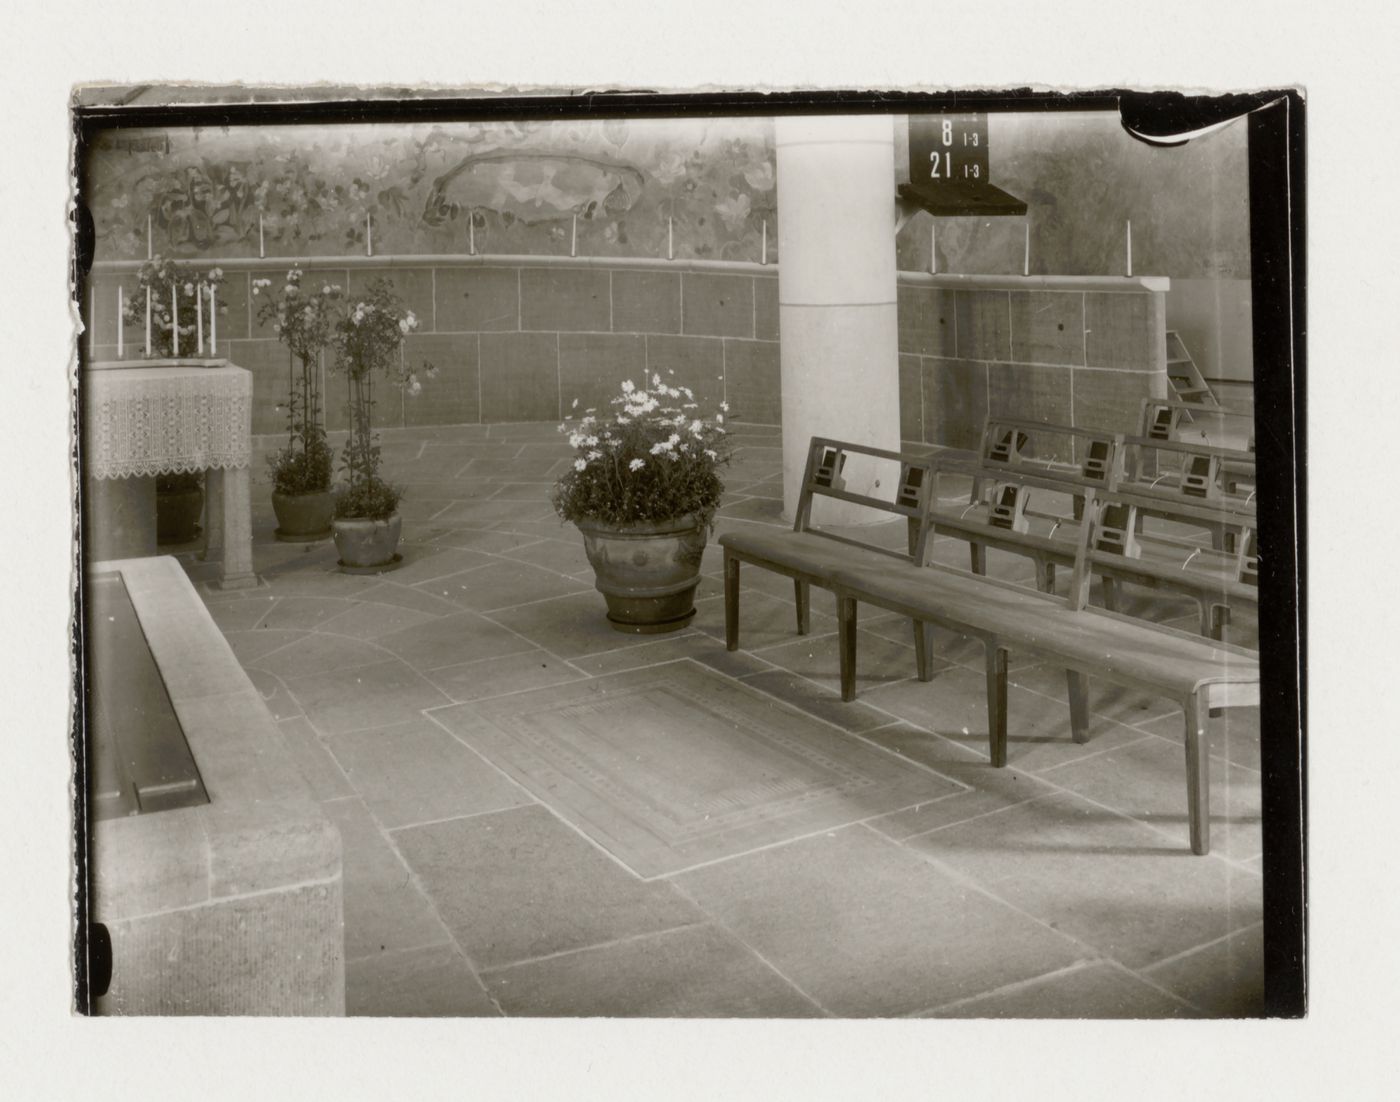 Interior view of the Chapel of the Holy Cross showing the altar, pews and ceramic floor tiles [?], Woodland Crematorium and Cemetery, Stockholm